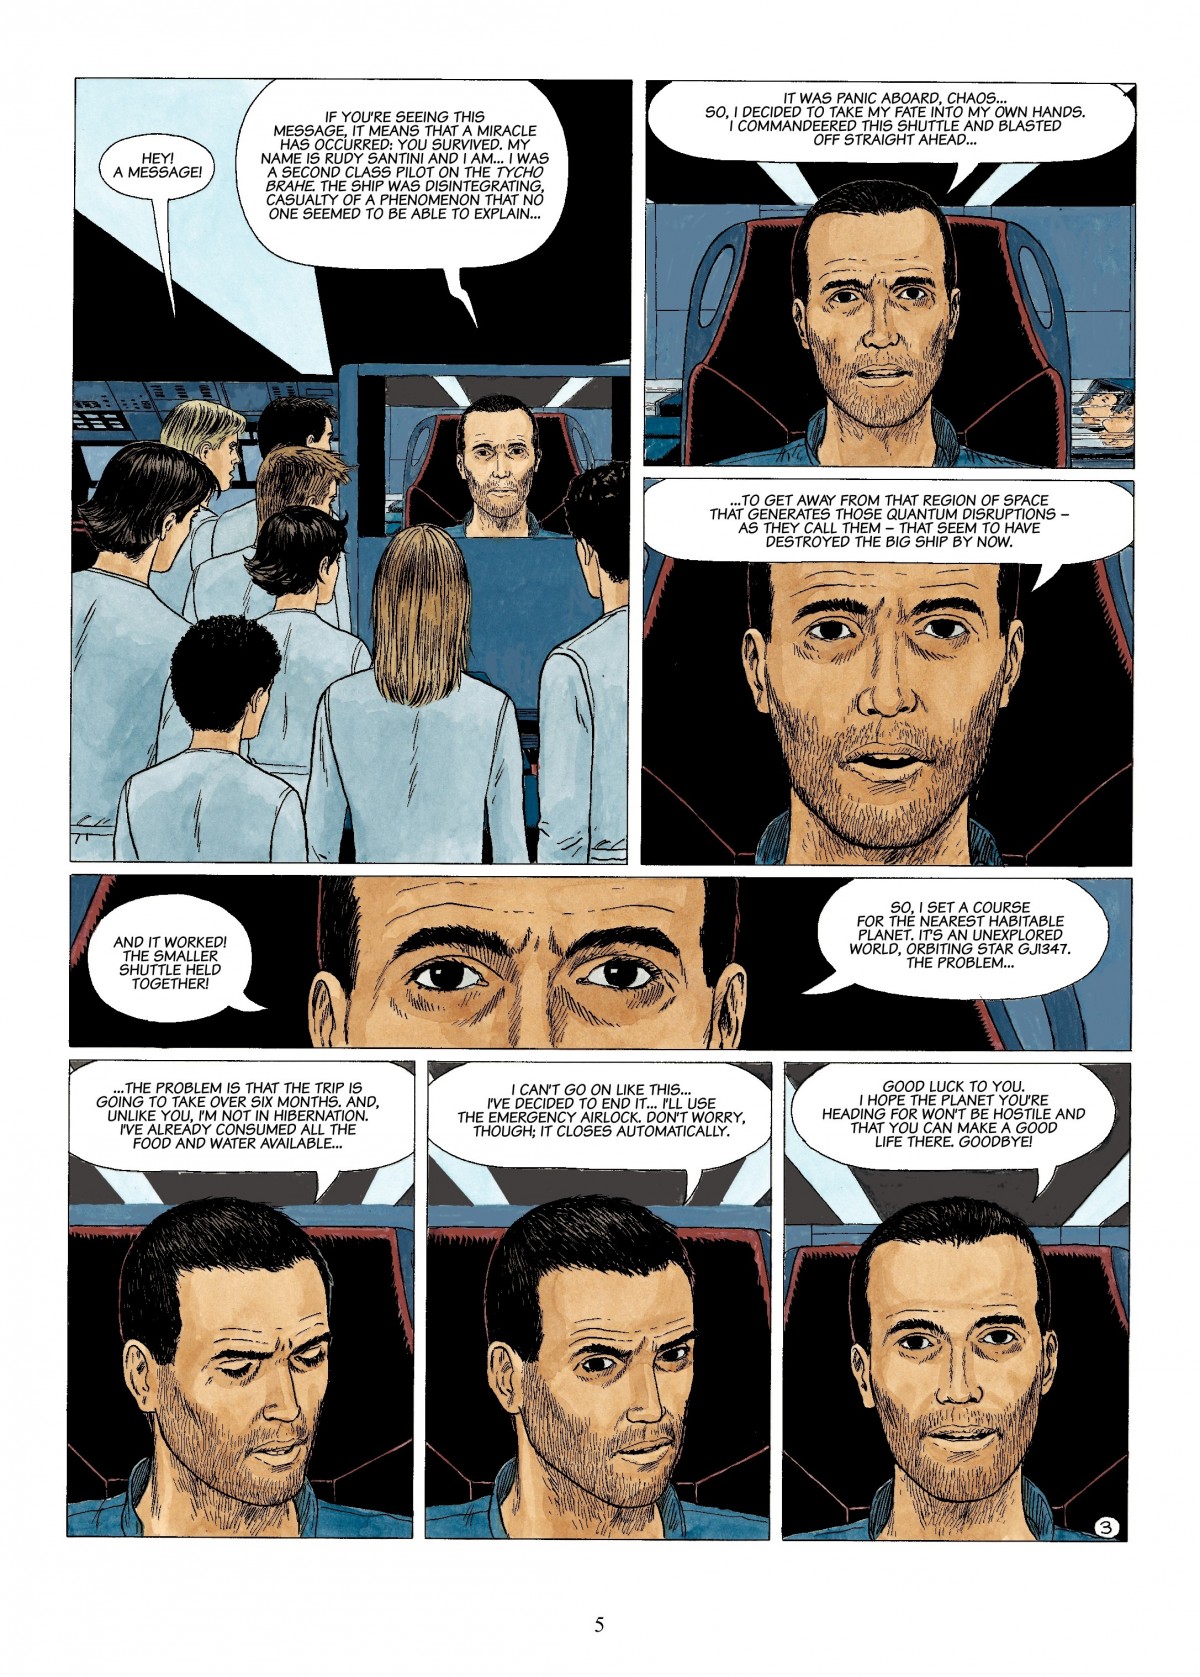 The Survivors (2014-2017): Chapter 1 - Page 5